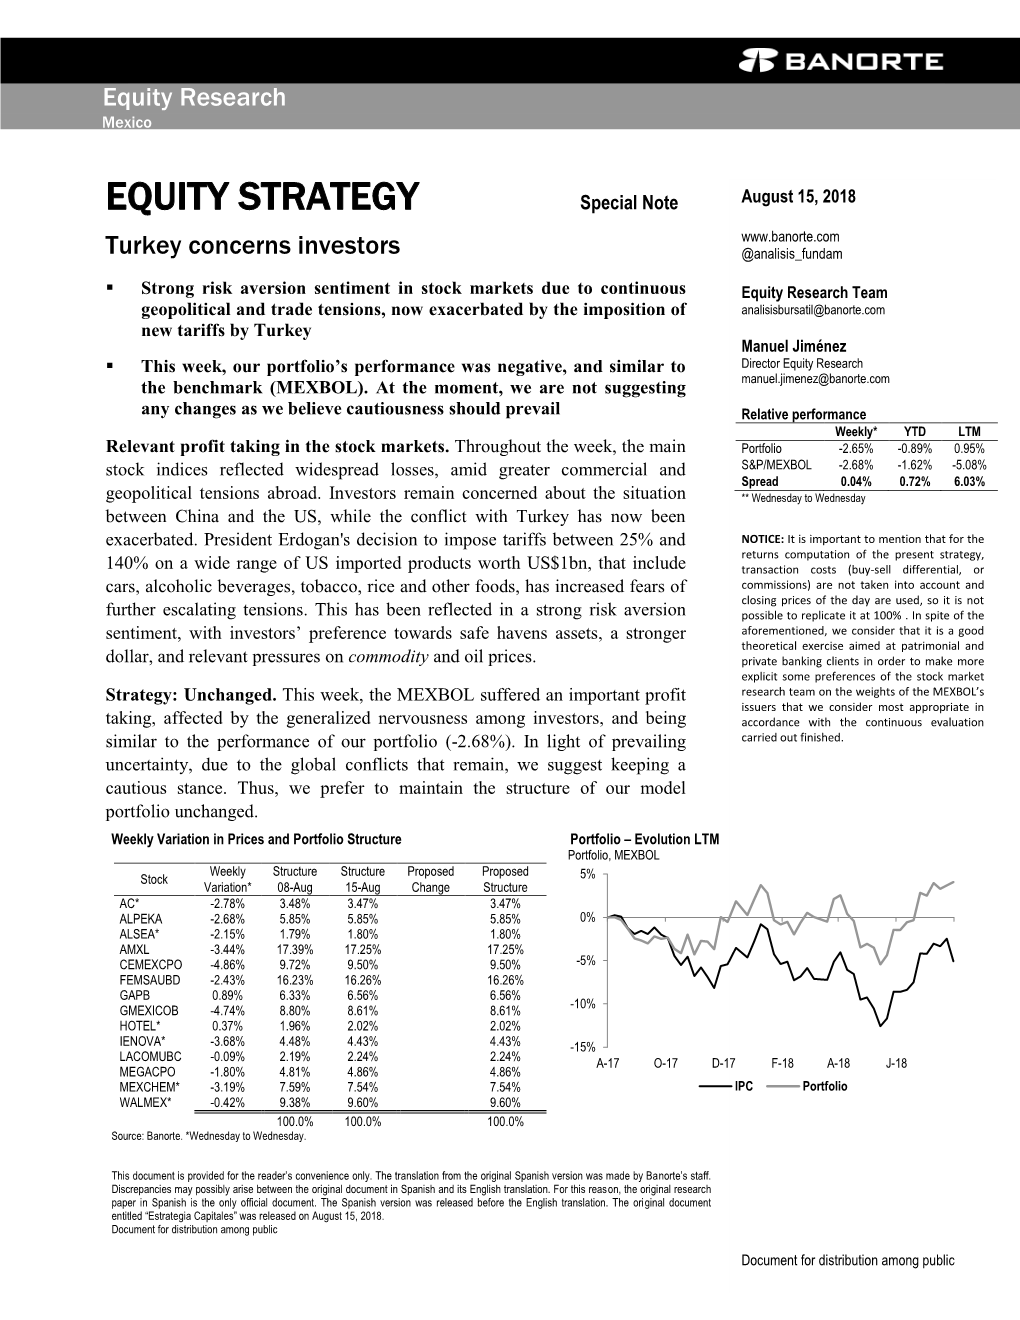 EQUITY STRATEGY Special Note August 15, 2018